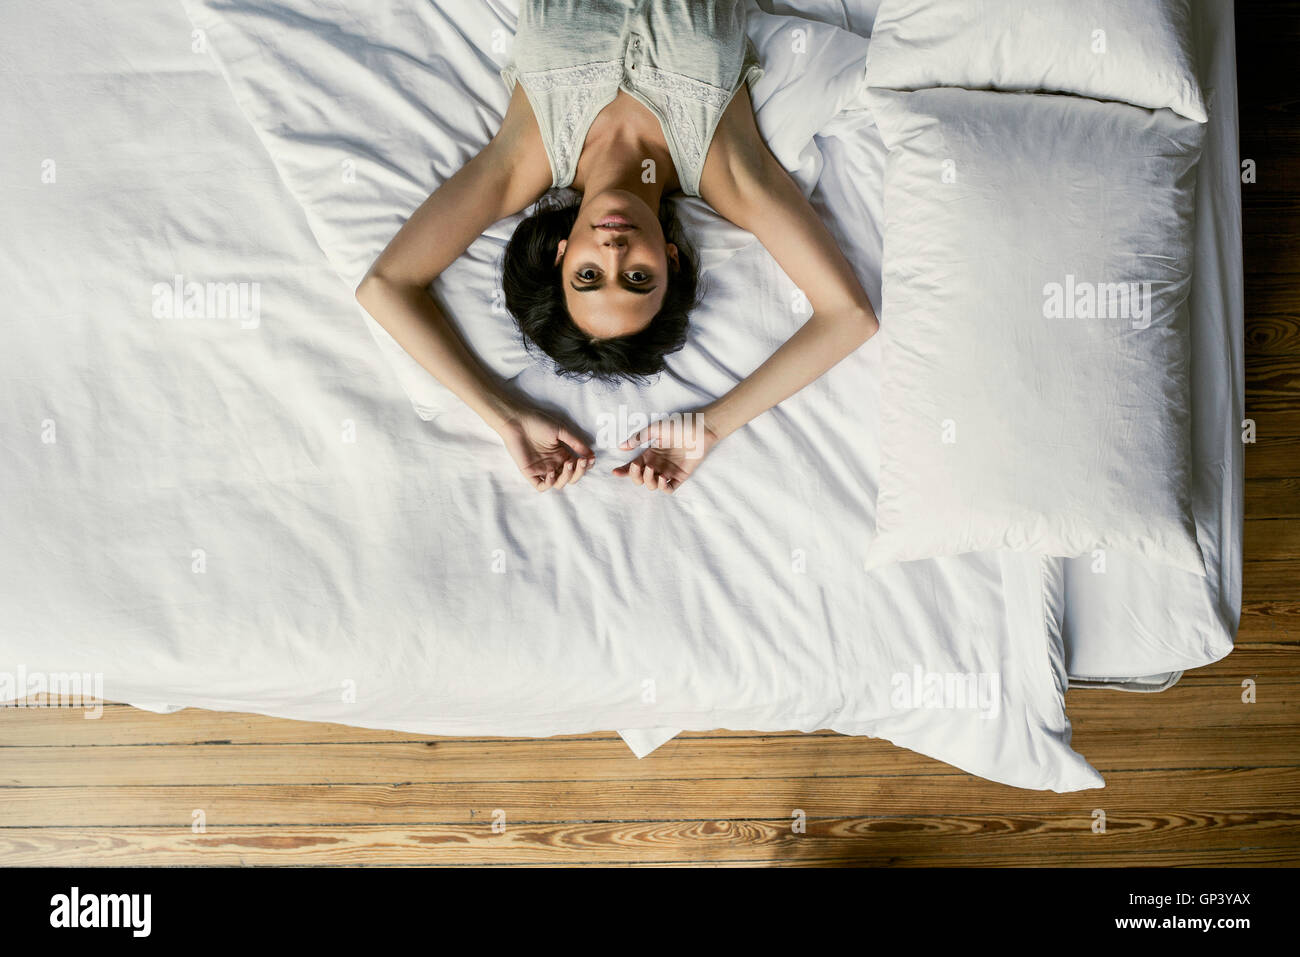 Stretching Woman Lying in Bed Banque D'Images